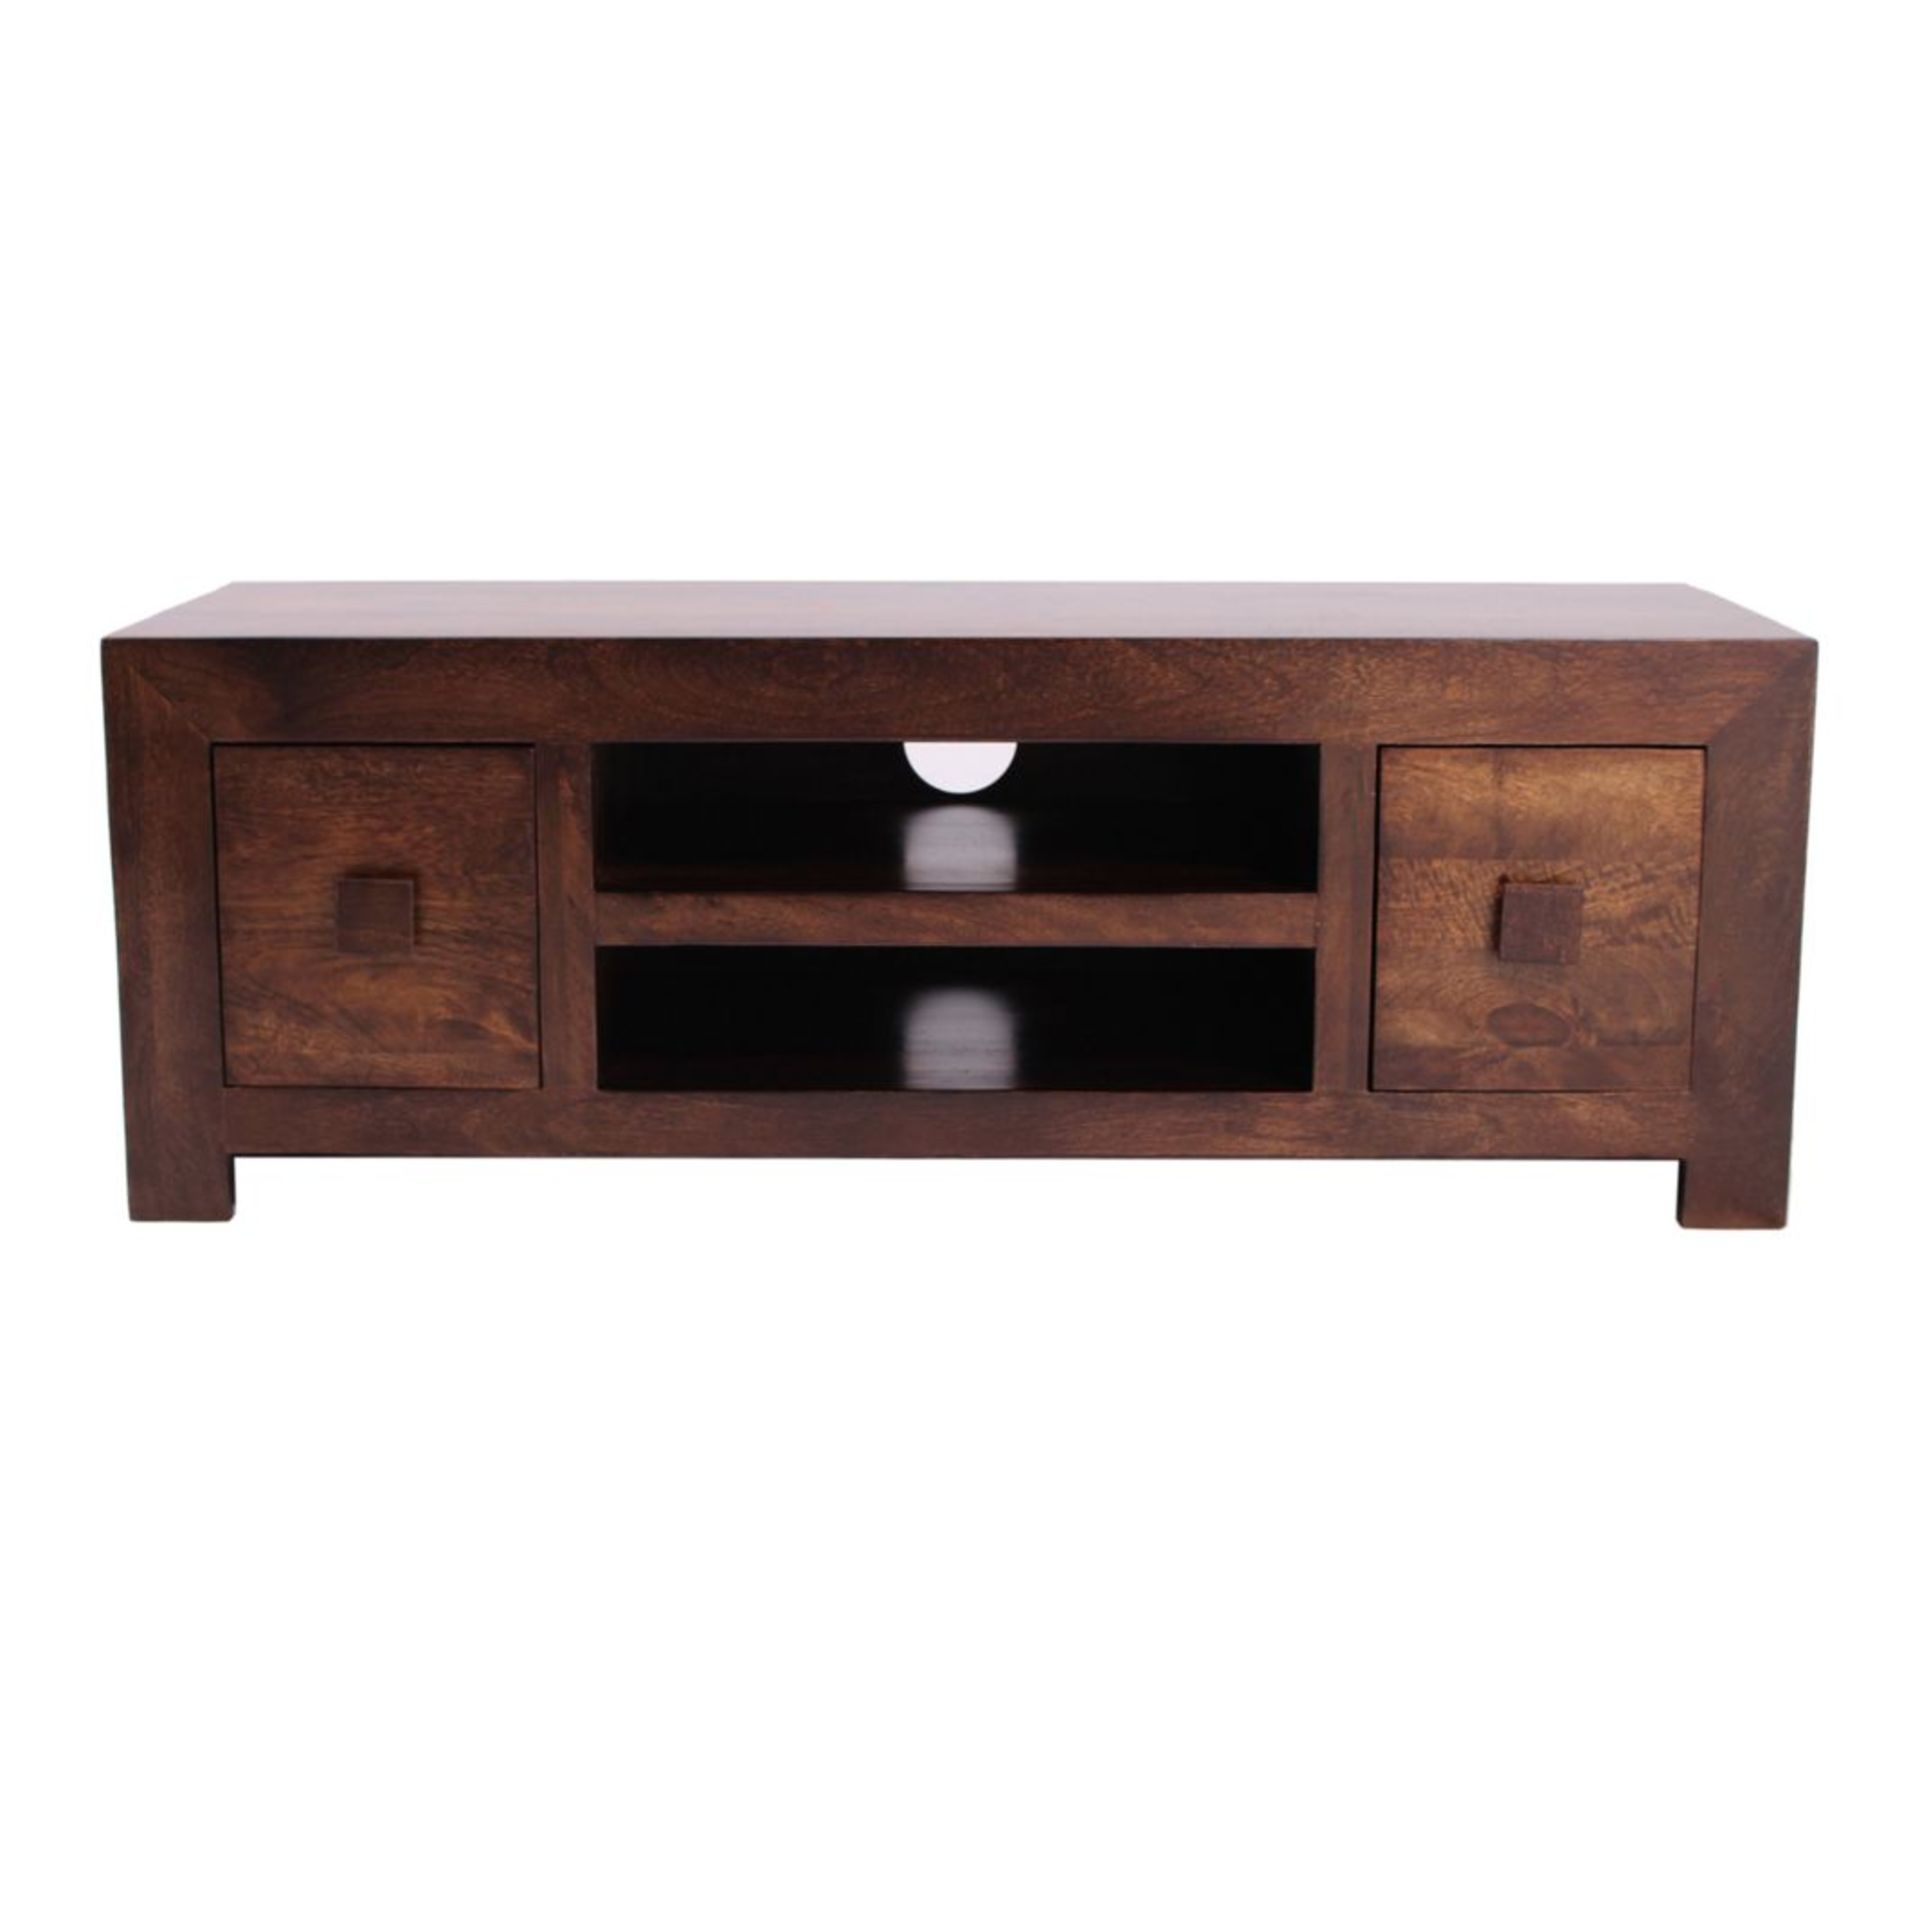 1 GRADE C DEBENHAMS LARGE TV UNIT WITH 2 DRAWERS IN MANGO / RRP £390.00 (VIEWING HIGHLY